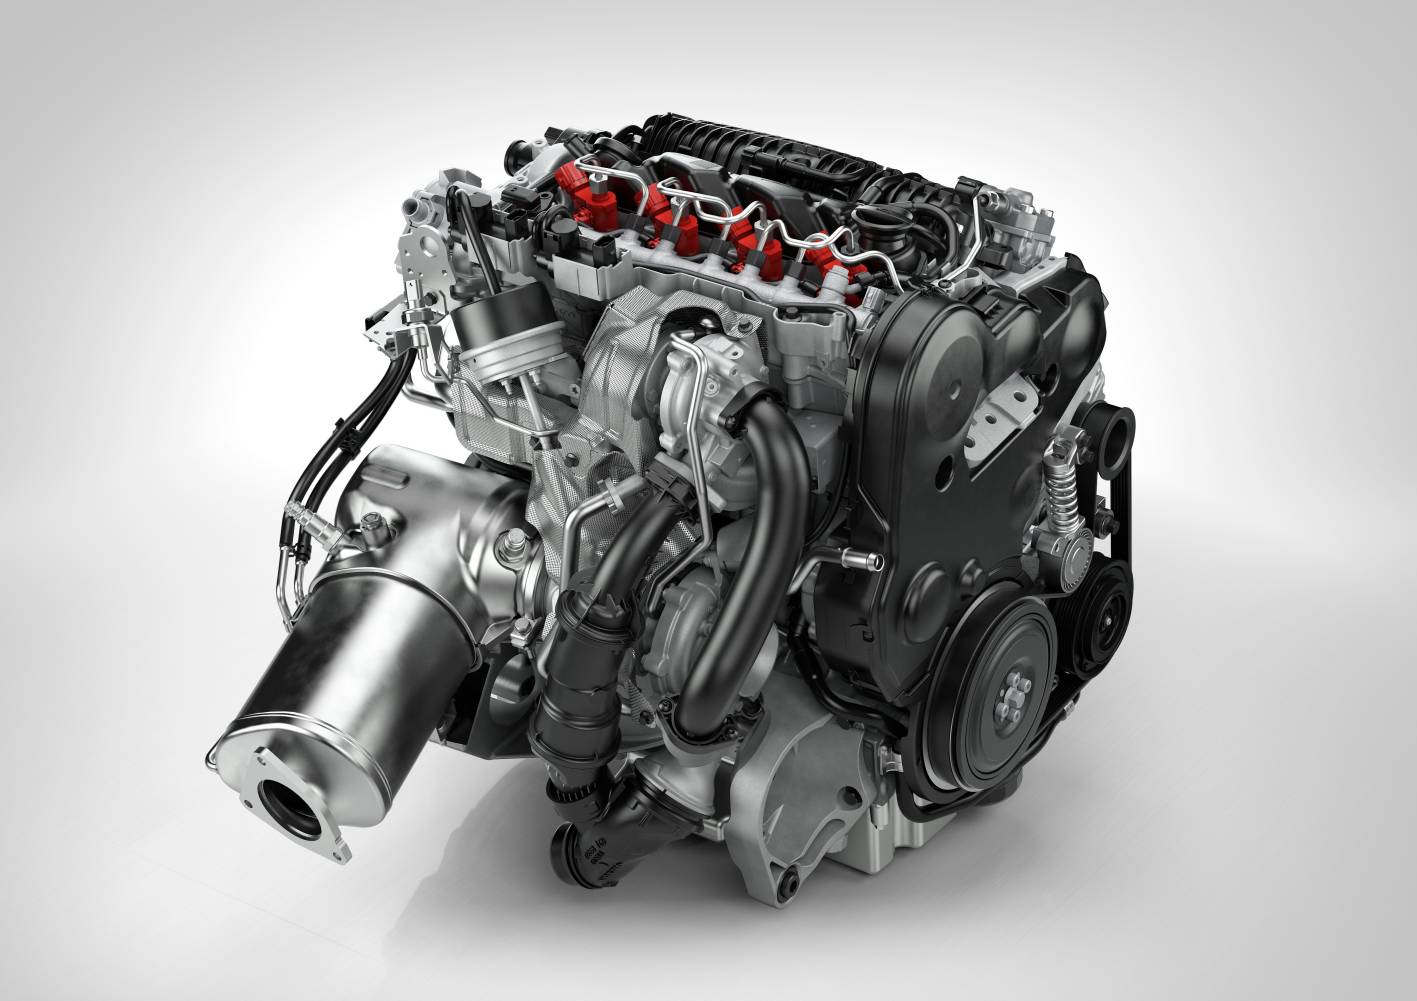 Volvo confirms Drive-E three-cylinder engine family